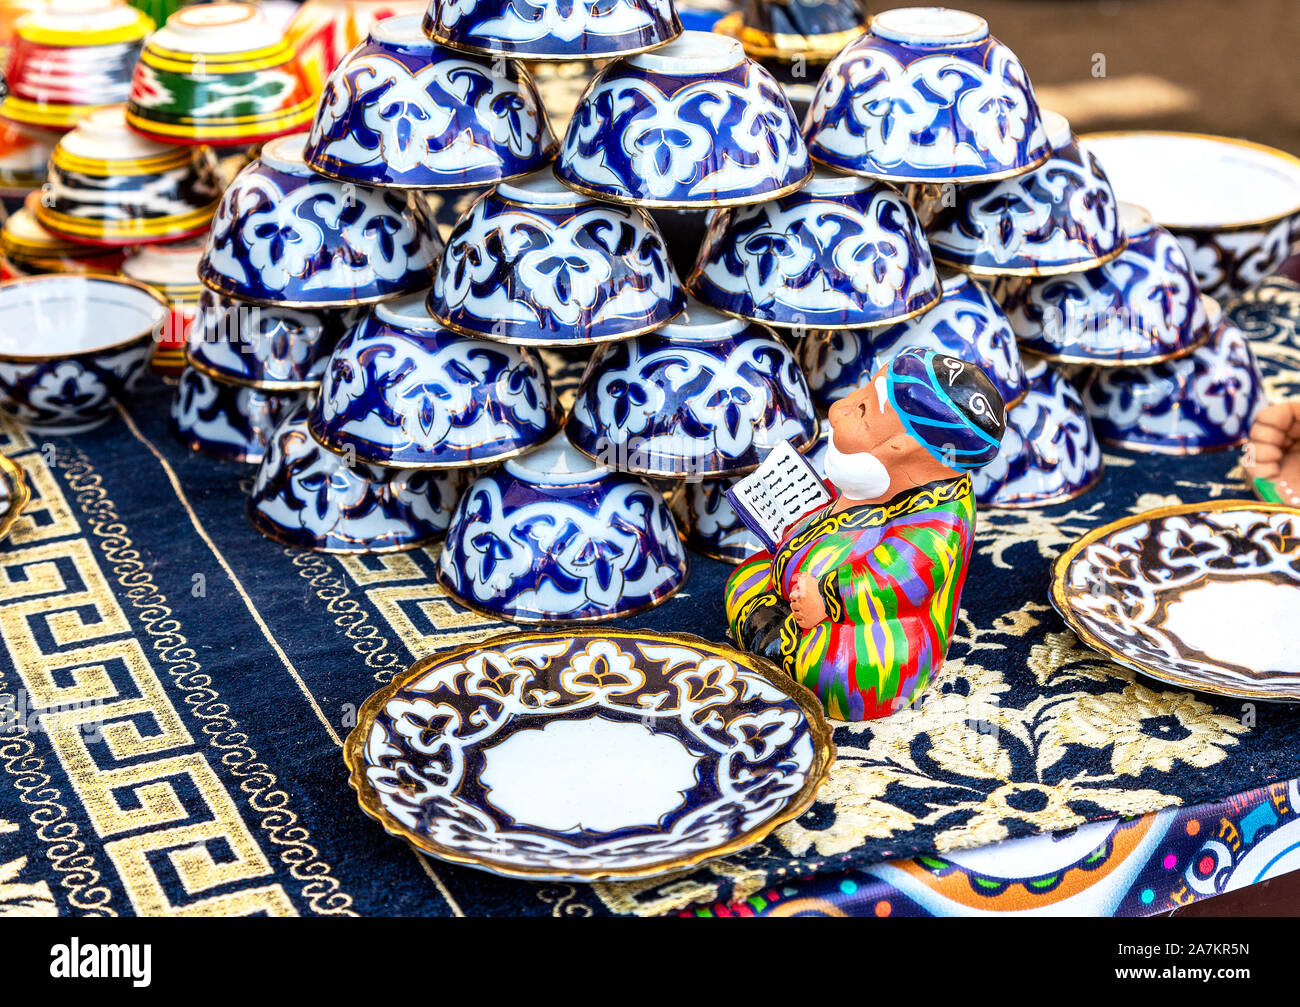 Uzbek ceramics are known for their traditional patterns and bright colors